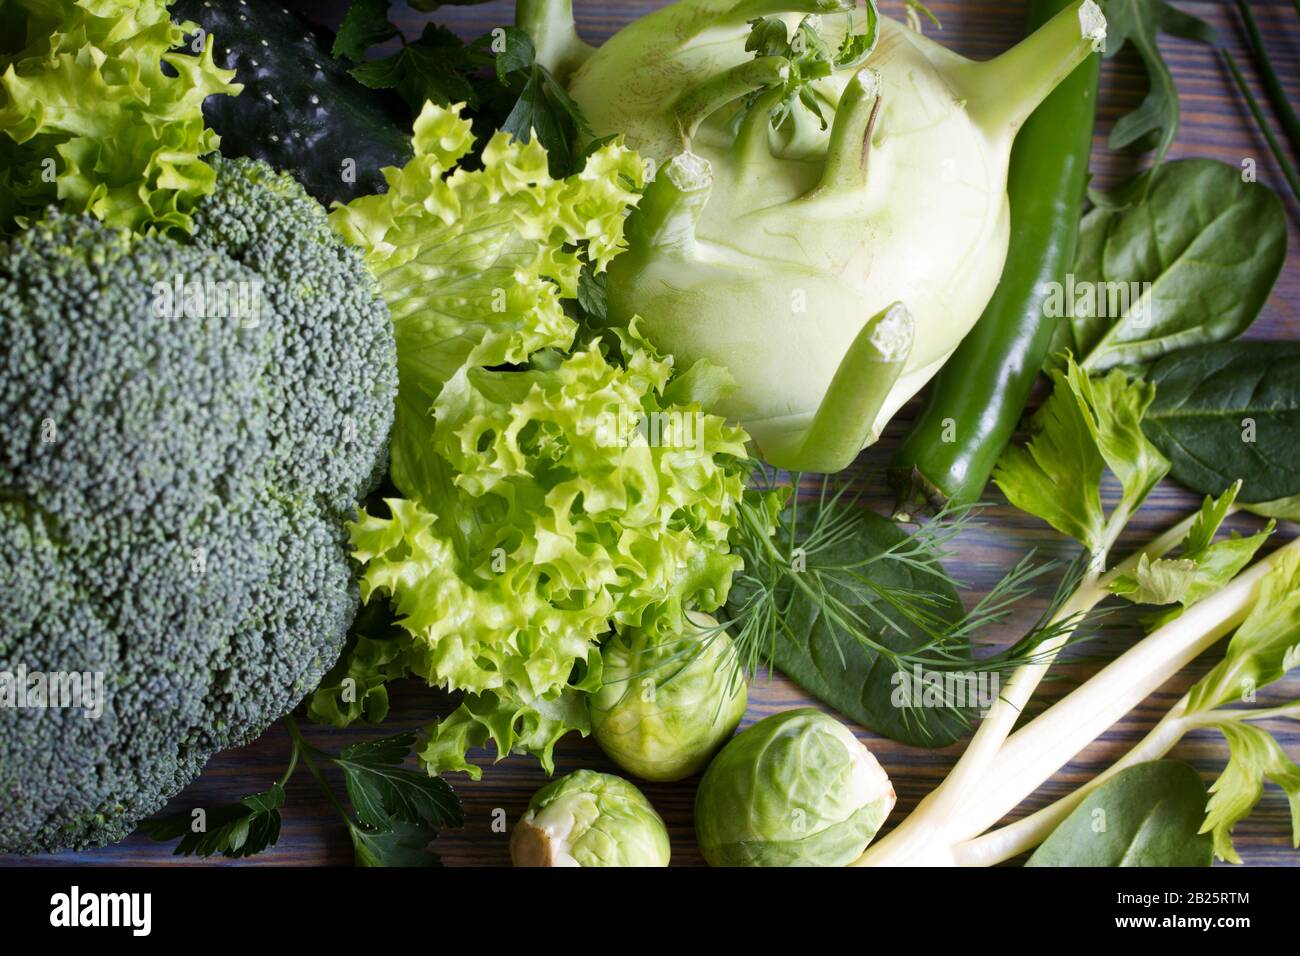 Green health vegetables on wooden table food still life Stock Photo